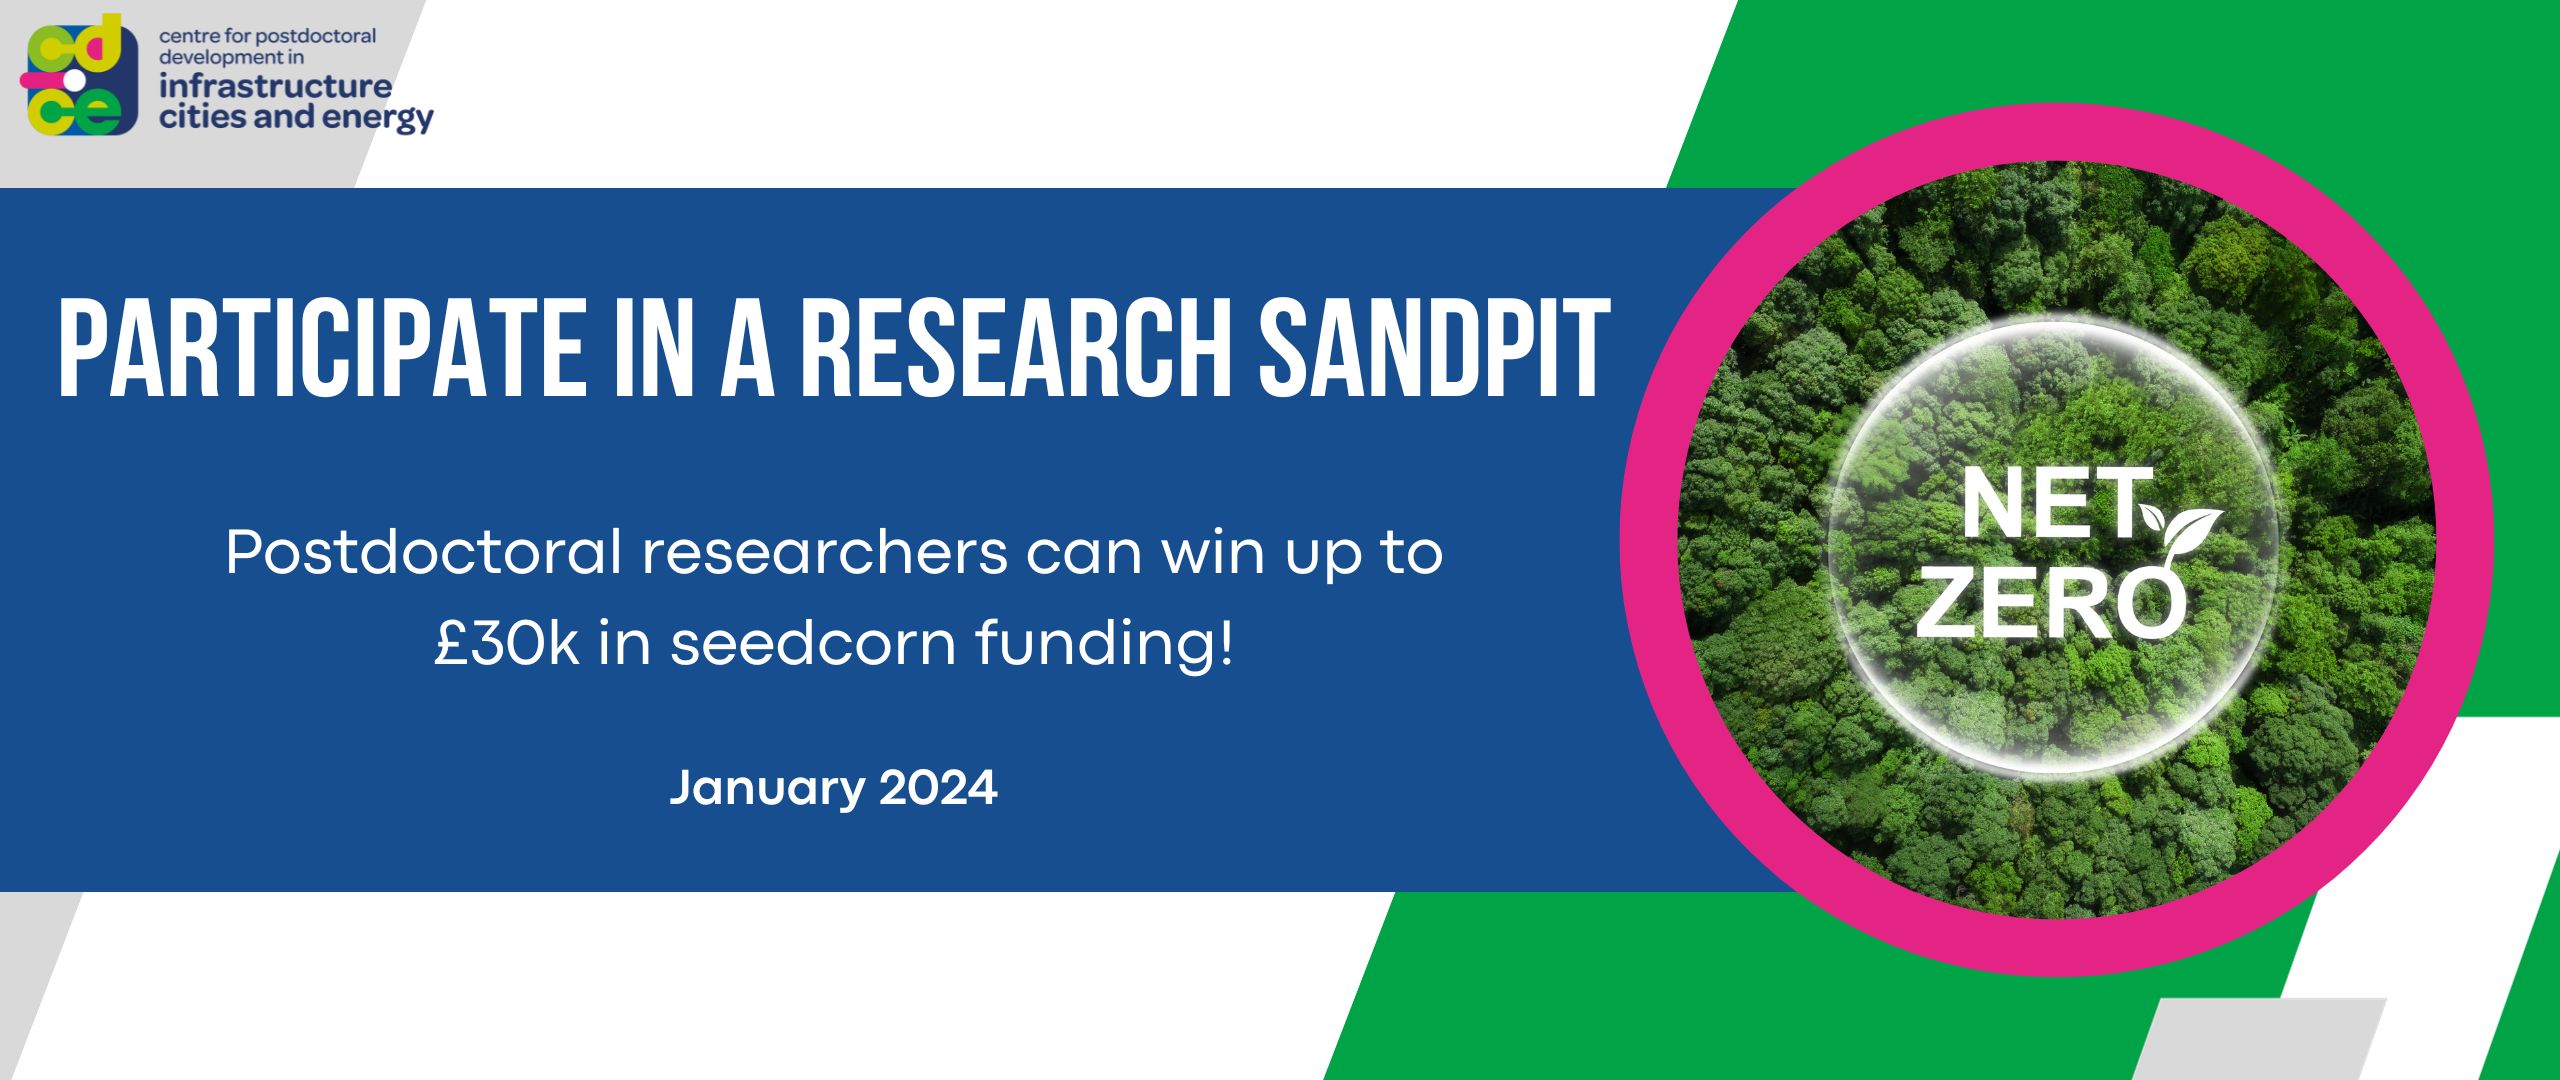 Two New C-DICE Research Sandpits Announced – Up To £30k In Funding Available!